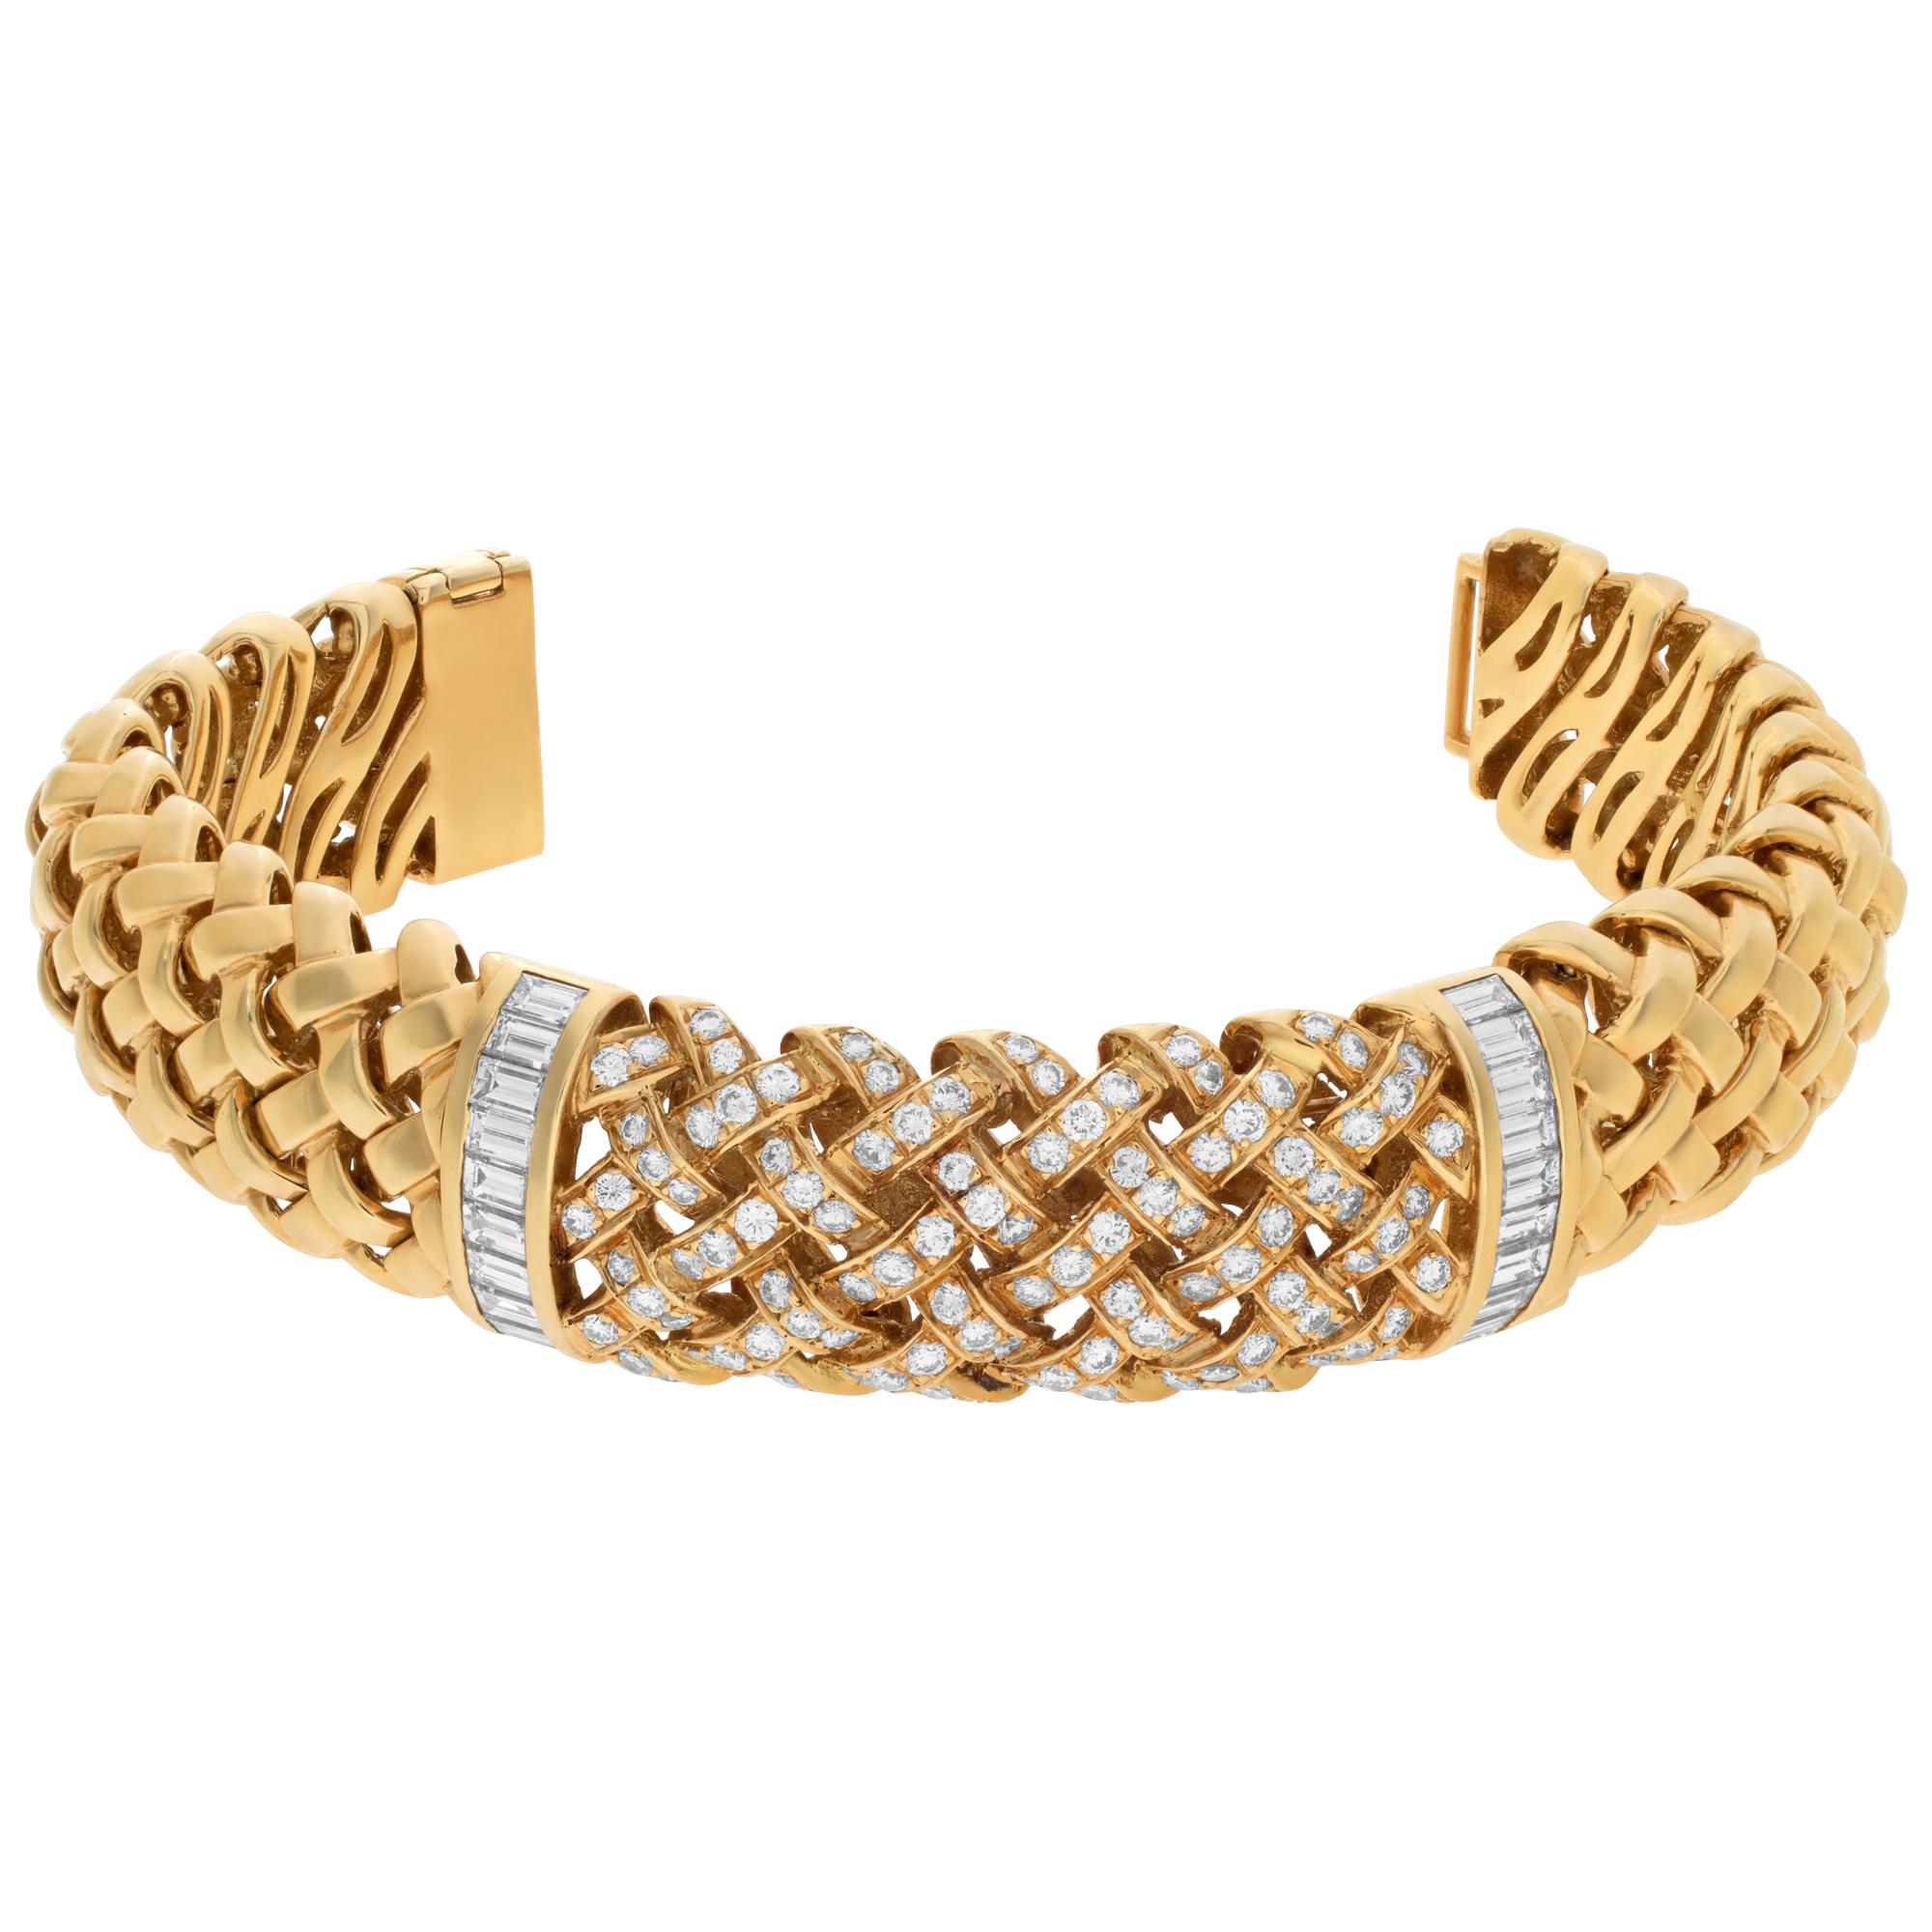 Tiffany & Co. Vannerie collection bracelet in 18K yellow gold. Woven link bracelet in polished 18k yellow gold with approximately 3 carats full round brilliant and baguette cut diamonds estimating F-G color, VVS clarity. 16 mm width x 8 inch.